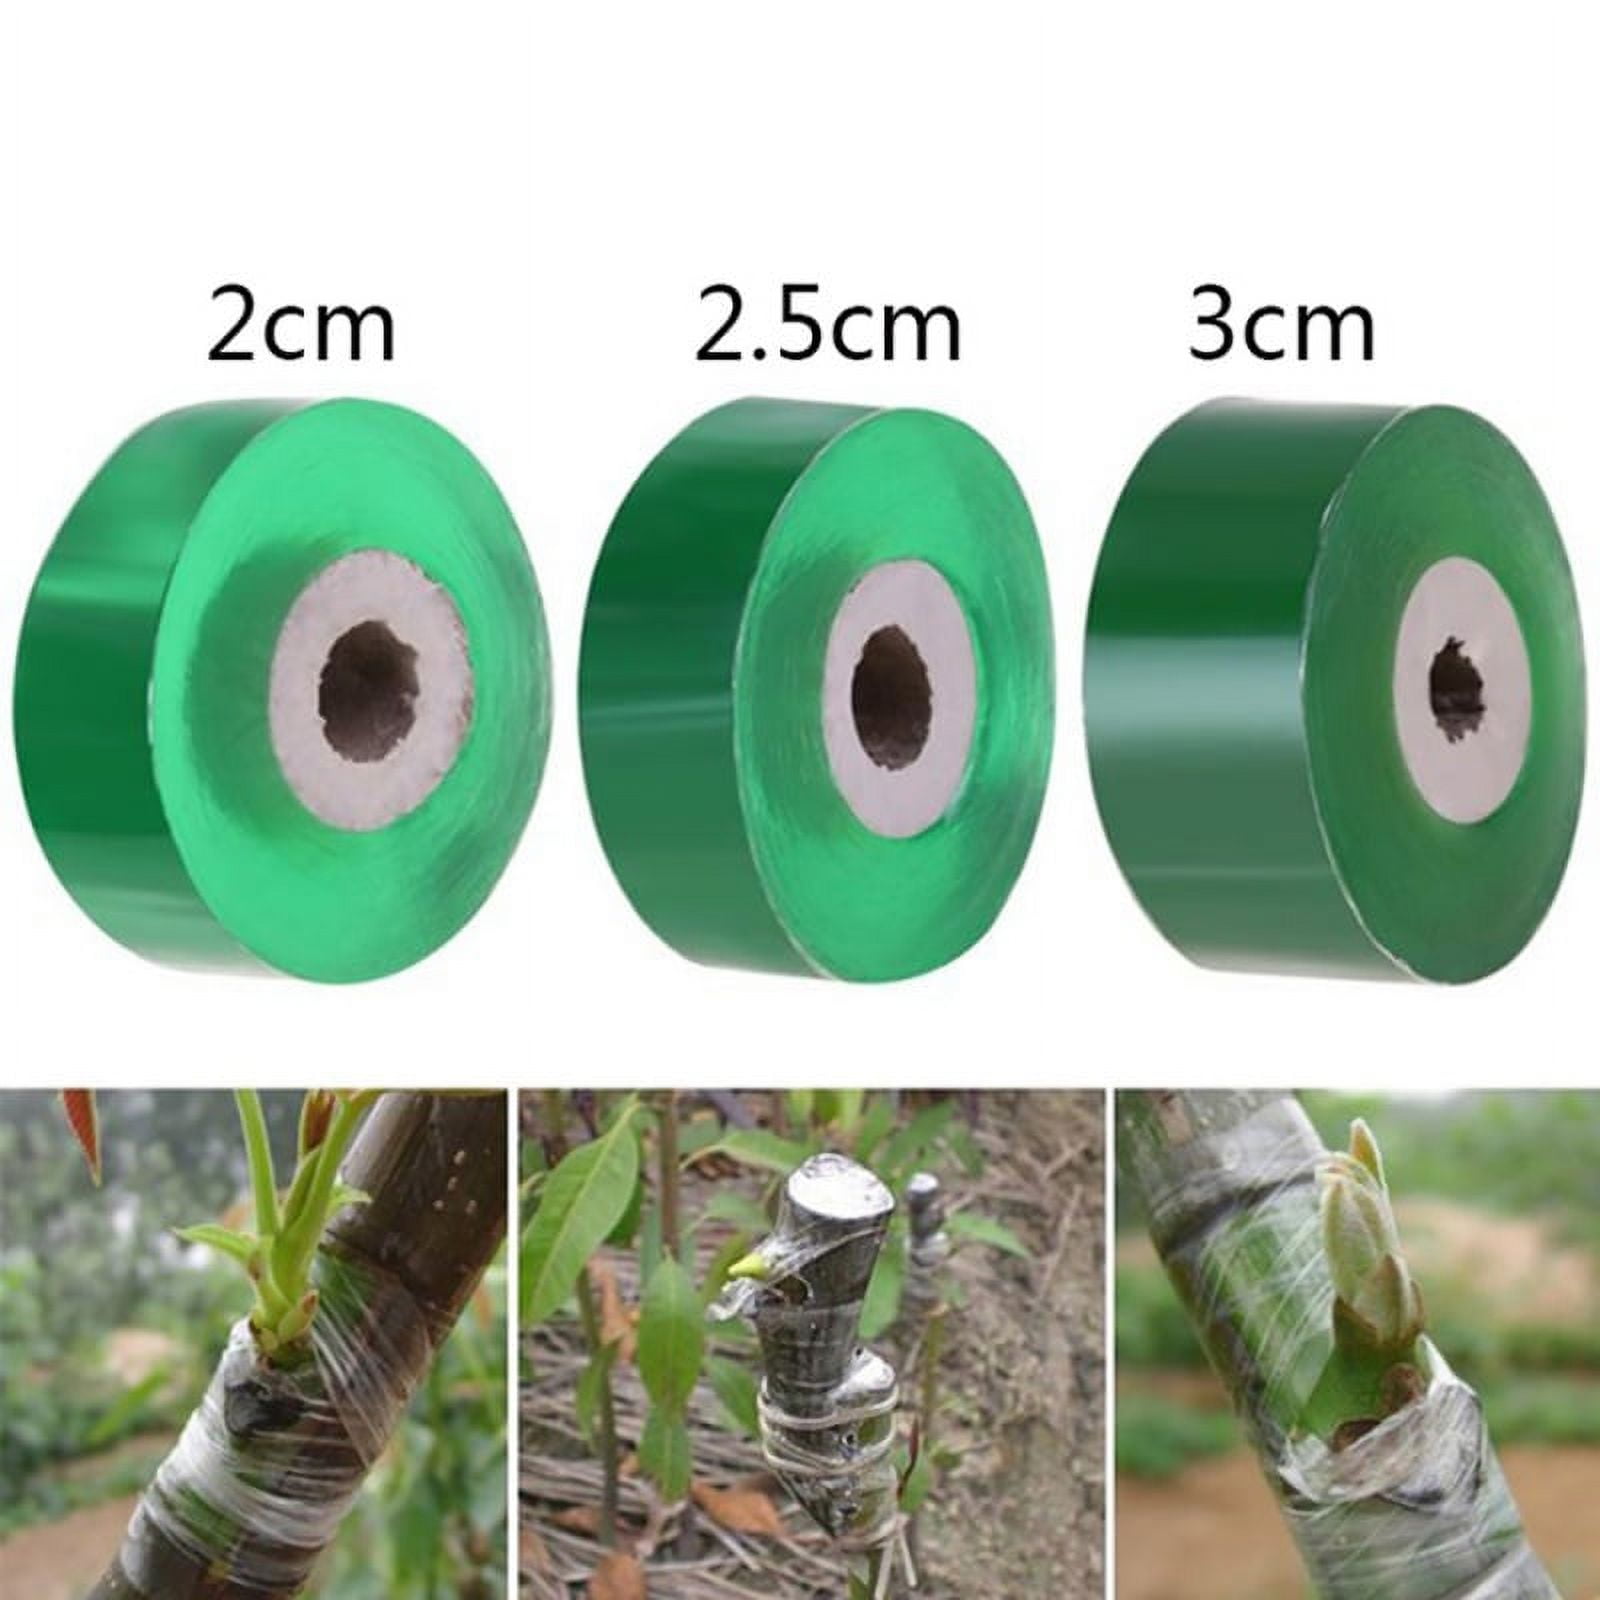 Pengxiaomei 2 pcs Grafting Tape, Stretchable Garden Grafting Tape Plants  Repair Tapes Clear Floristry Film for Floral Fruit Tree and Poly Budding  Tape